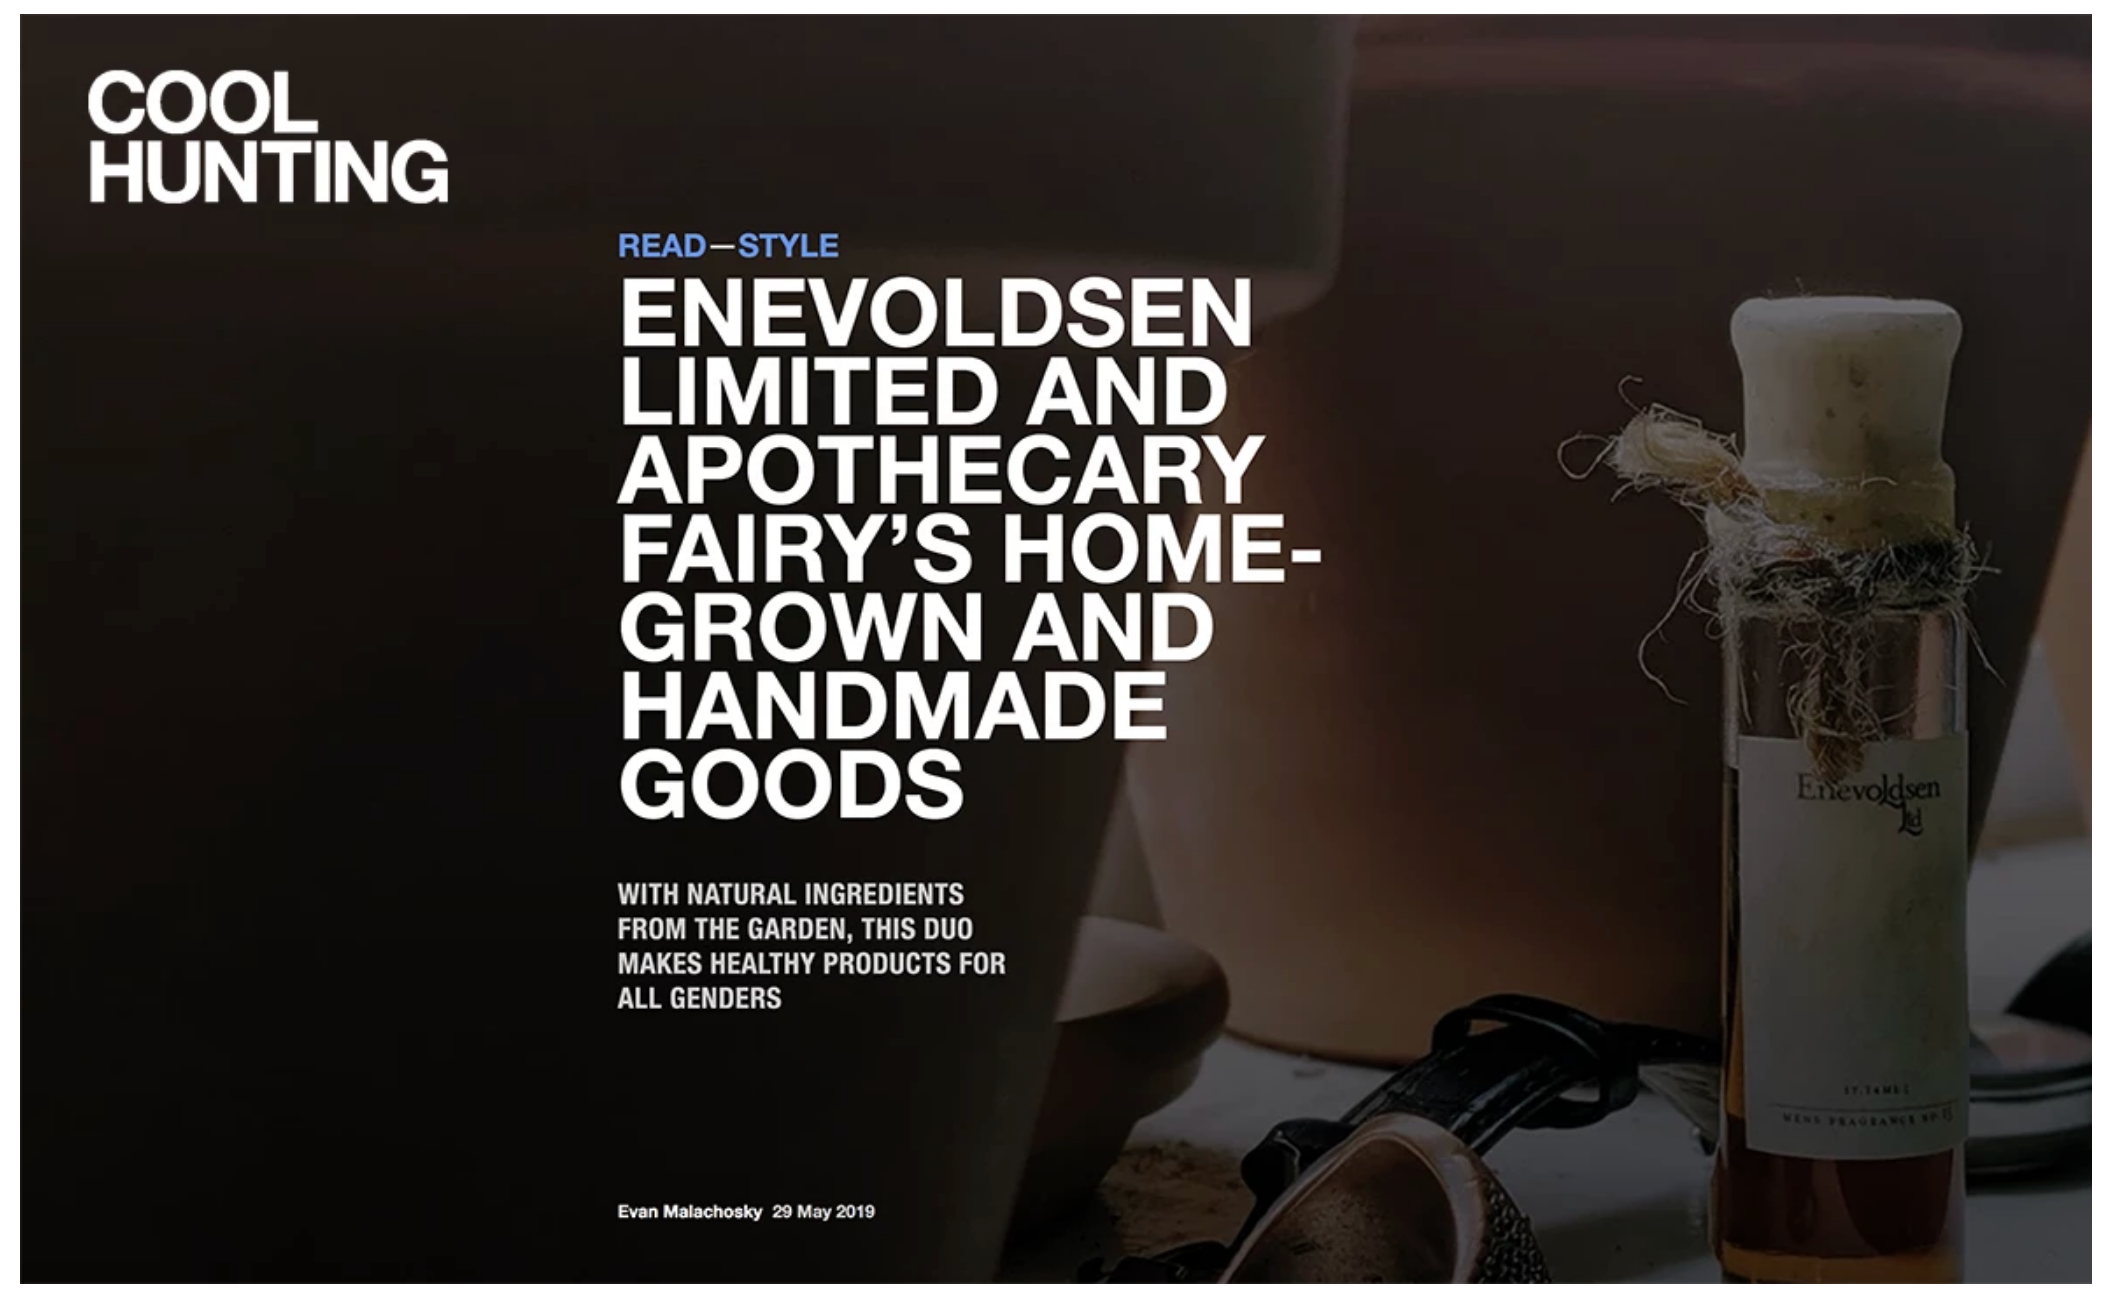 COOL HUNTING; Enevoldsen Limited & Apothecary Fairy Homegrown and Handmade Goods